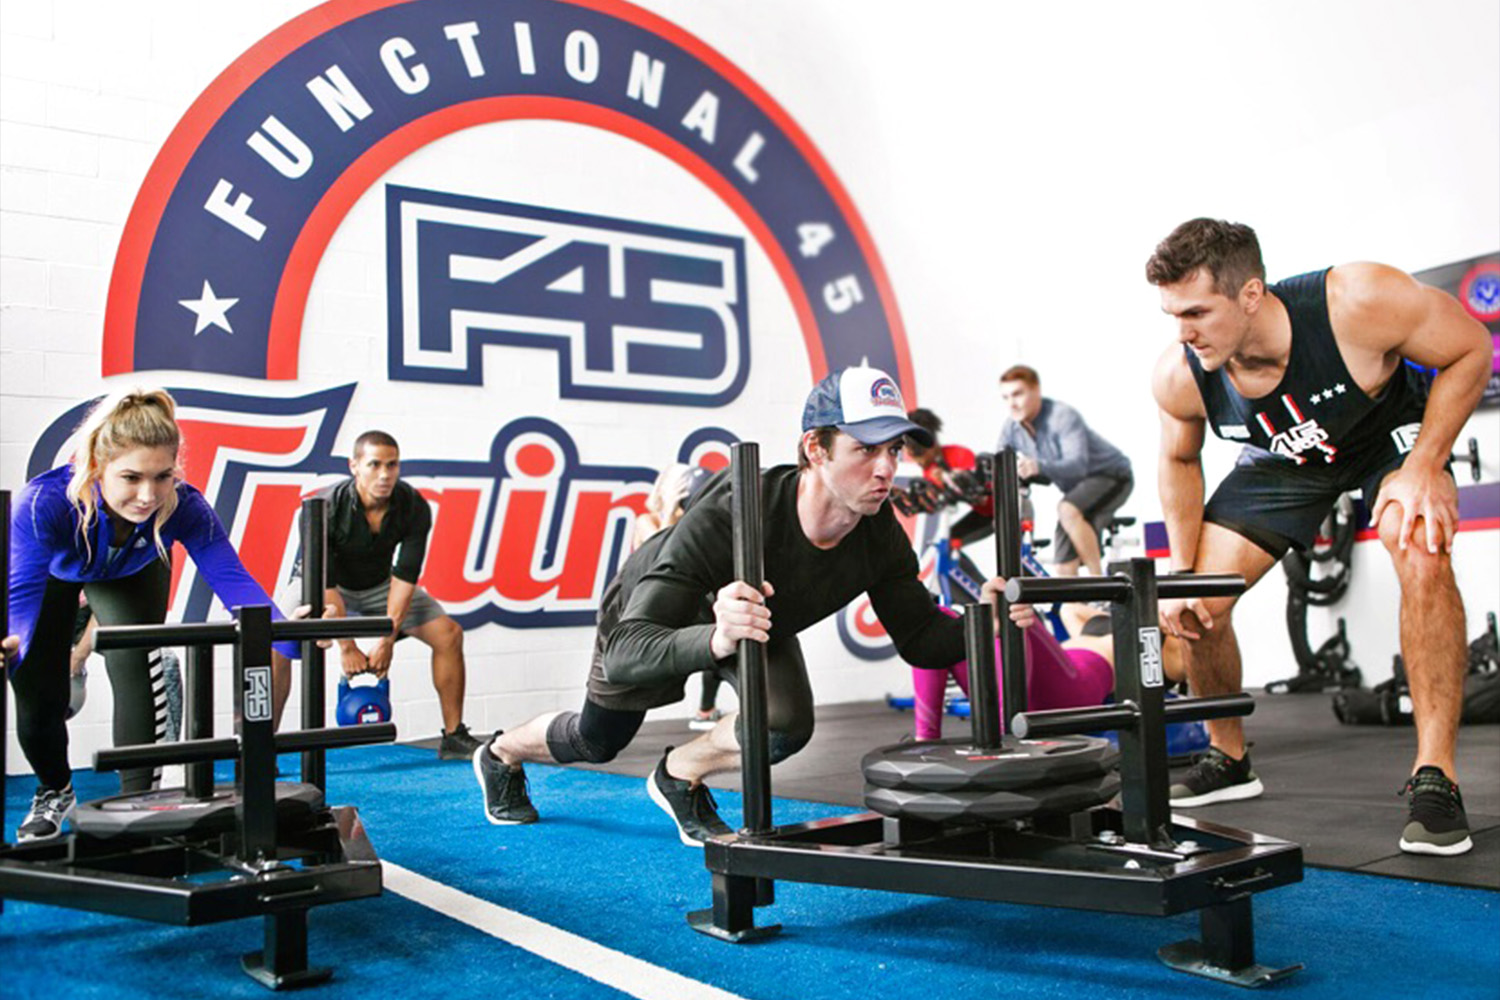 F45 Training Shares Tumble as CEO Quits, Wahlberg Sells